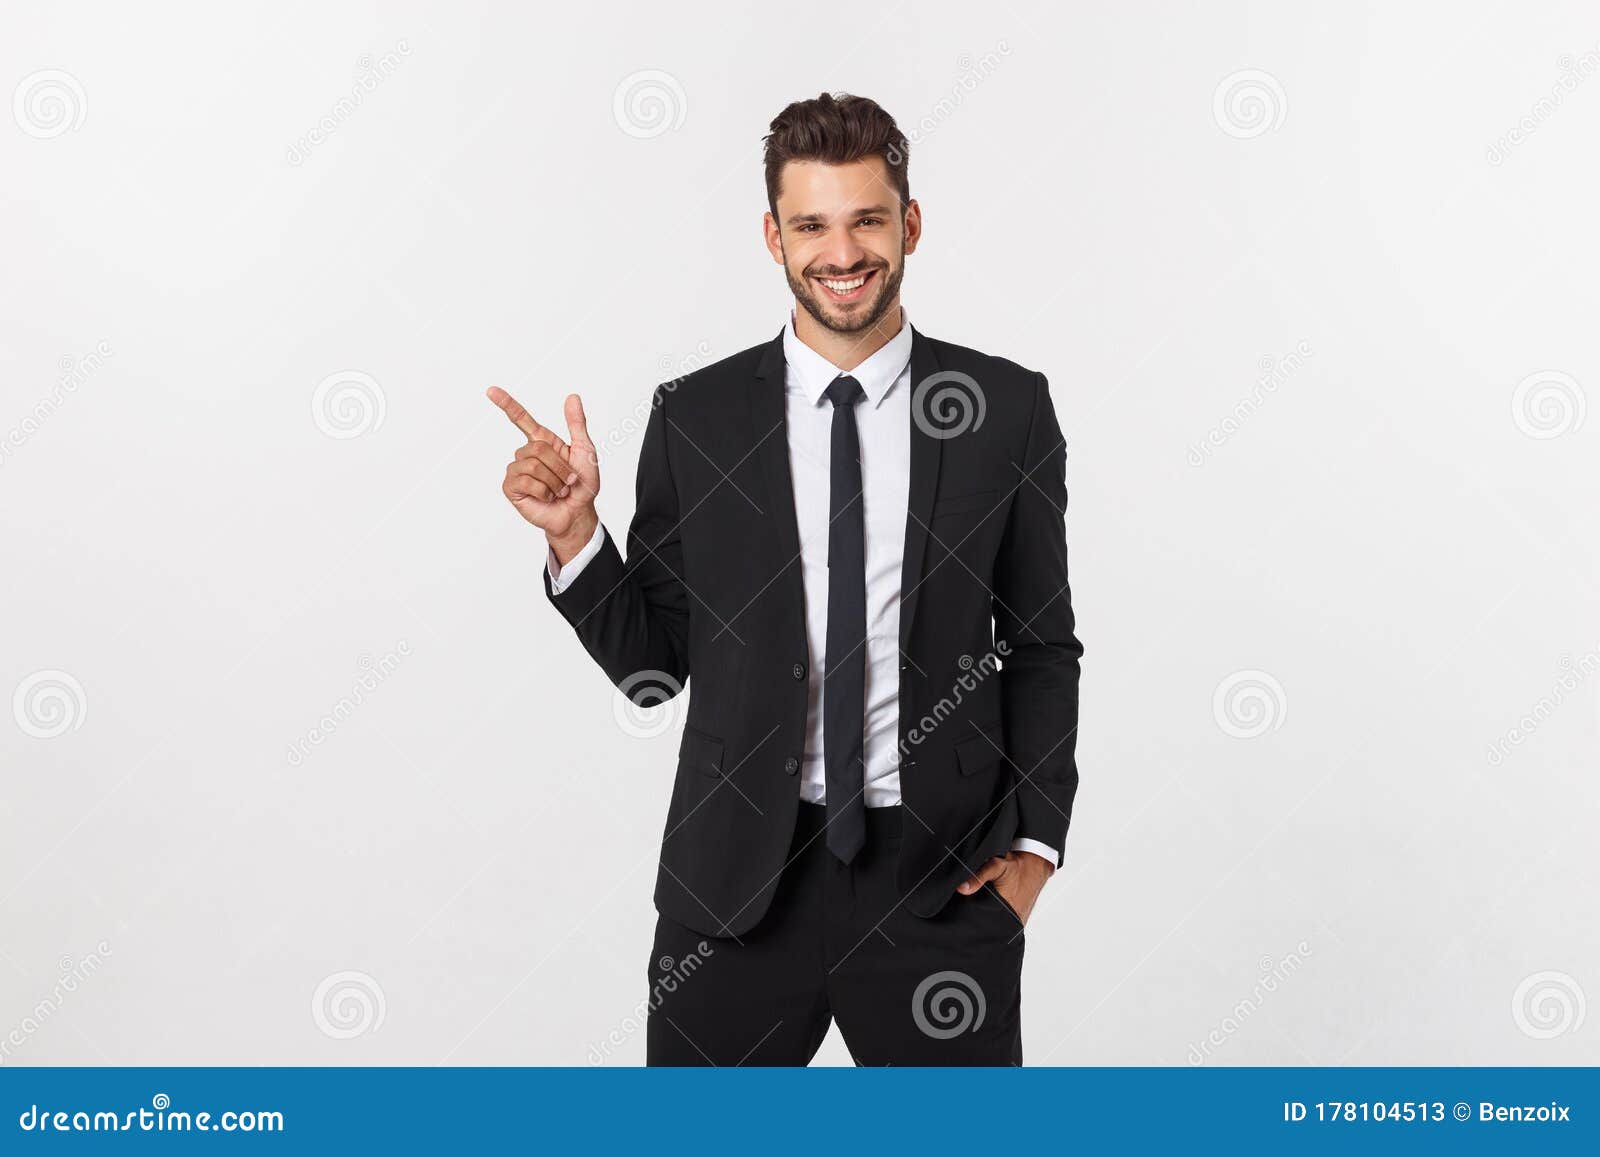 Portrait of Young Business Man in Suit Pointing at Copy Space Over ...